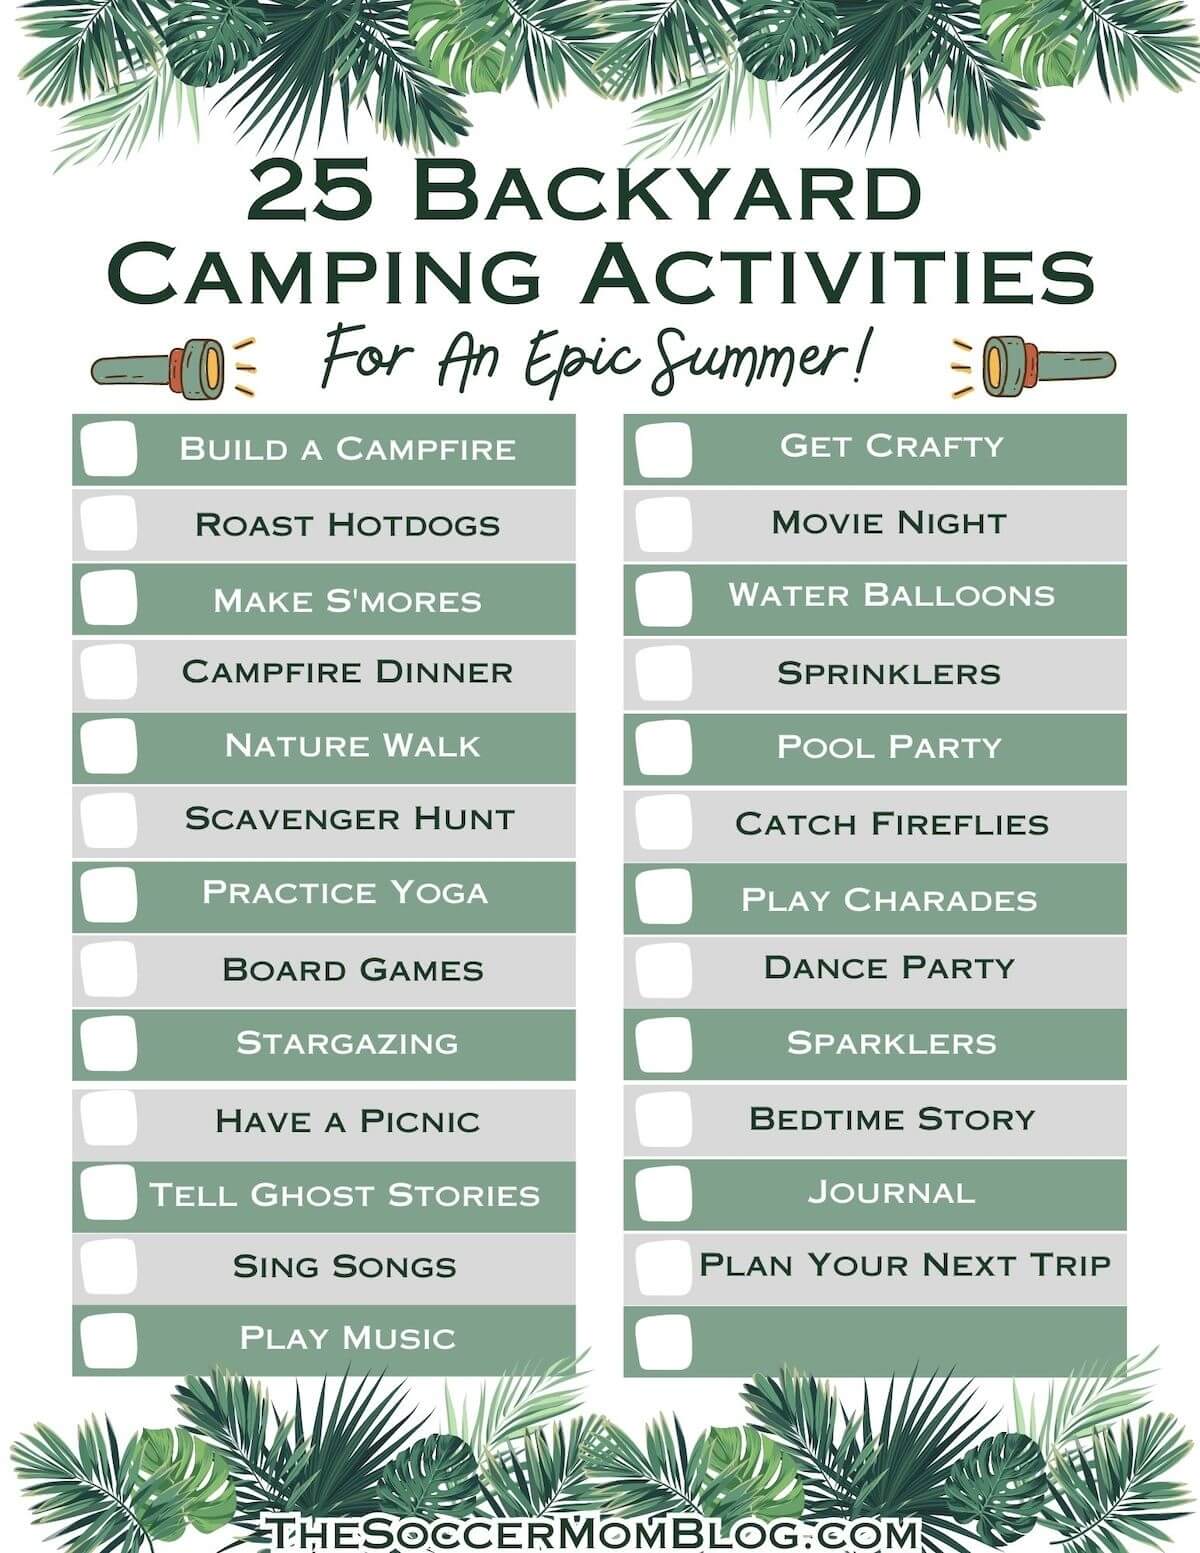 Backyard camping checklist with 25 ideas